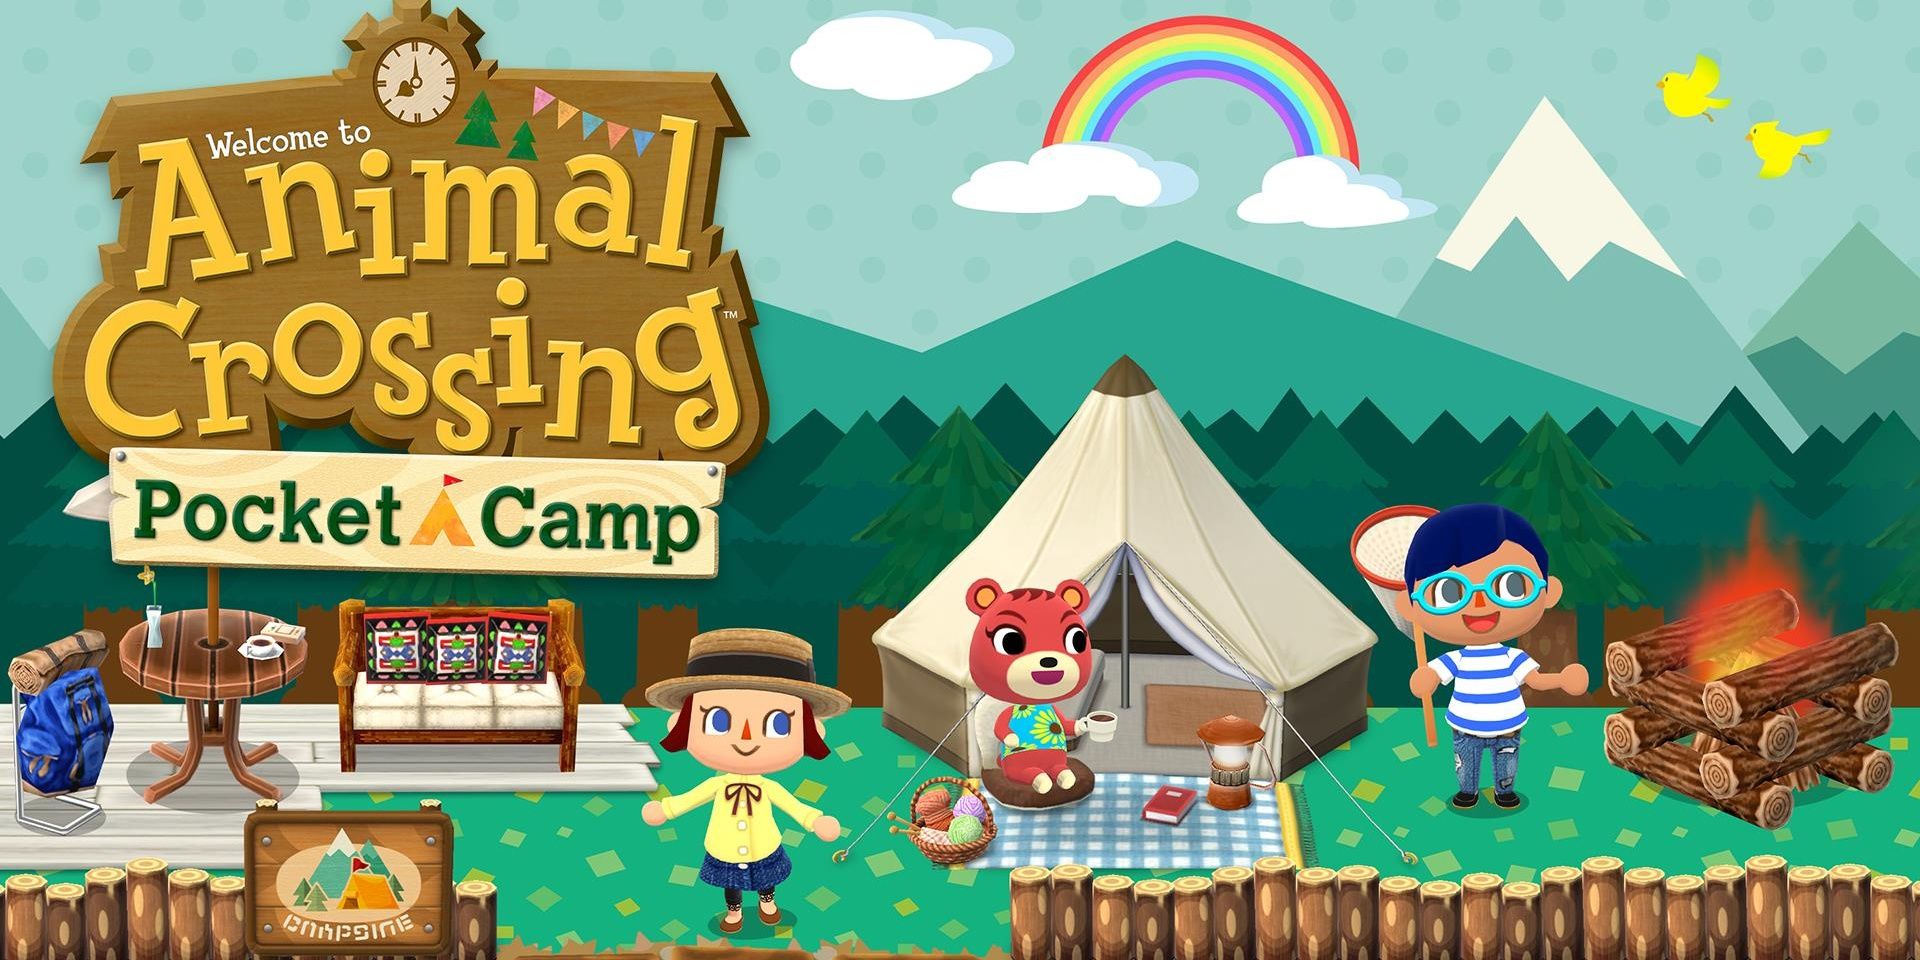 A promotional image from Animal Crossing: Pocket Camp.